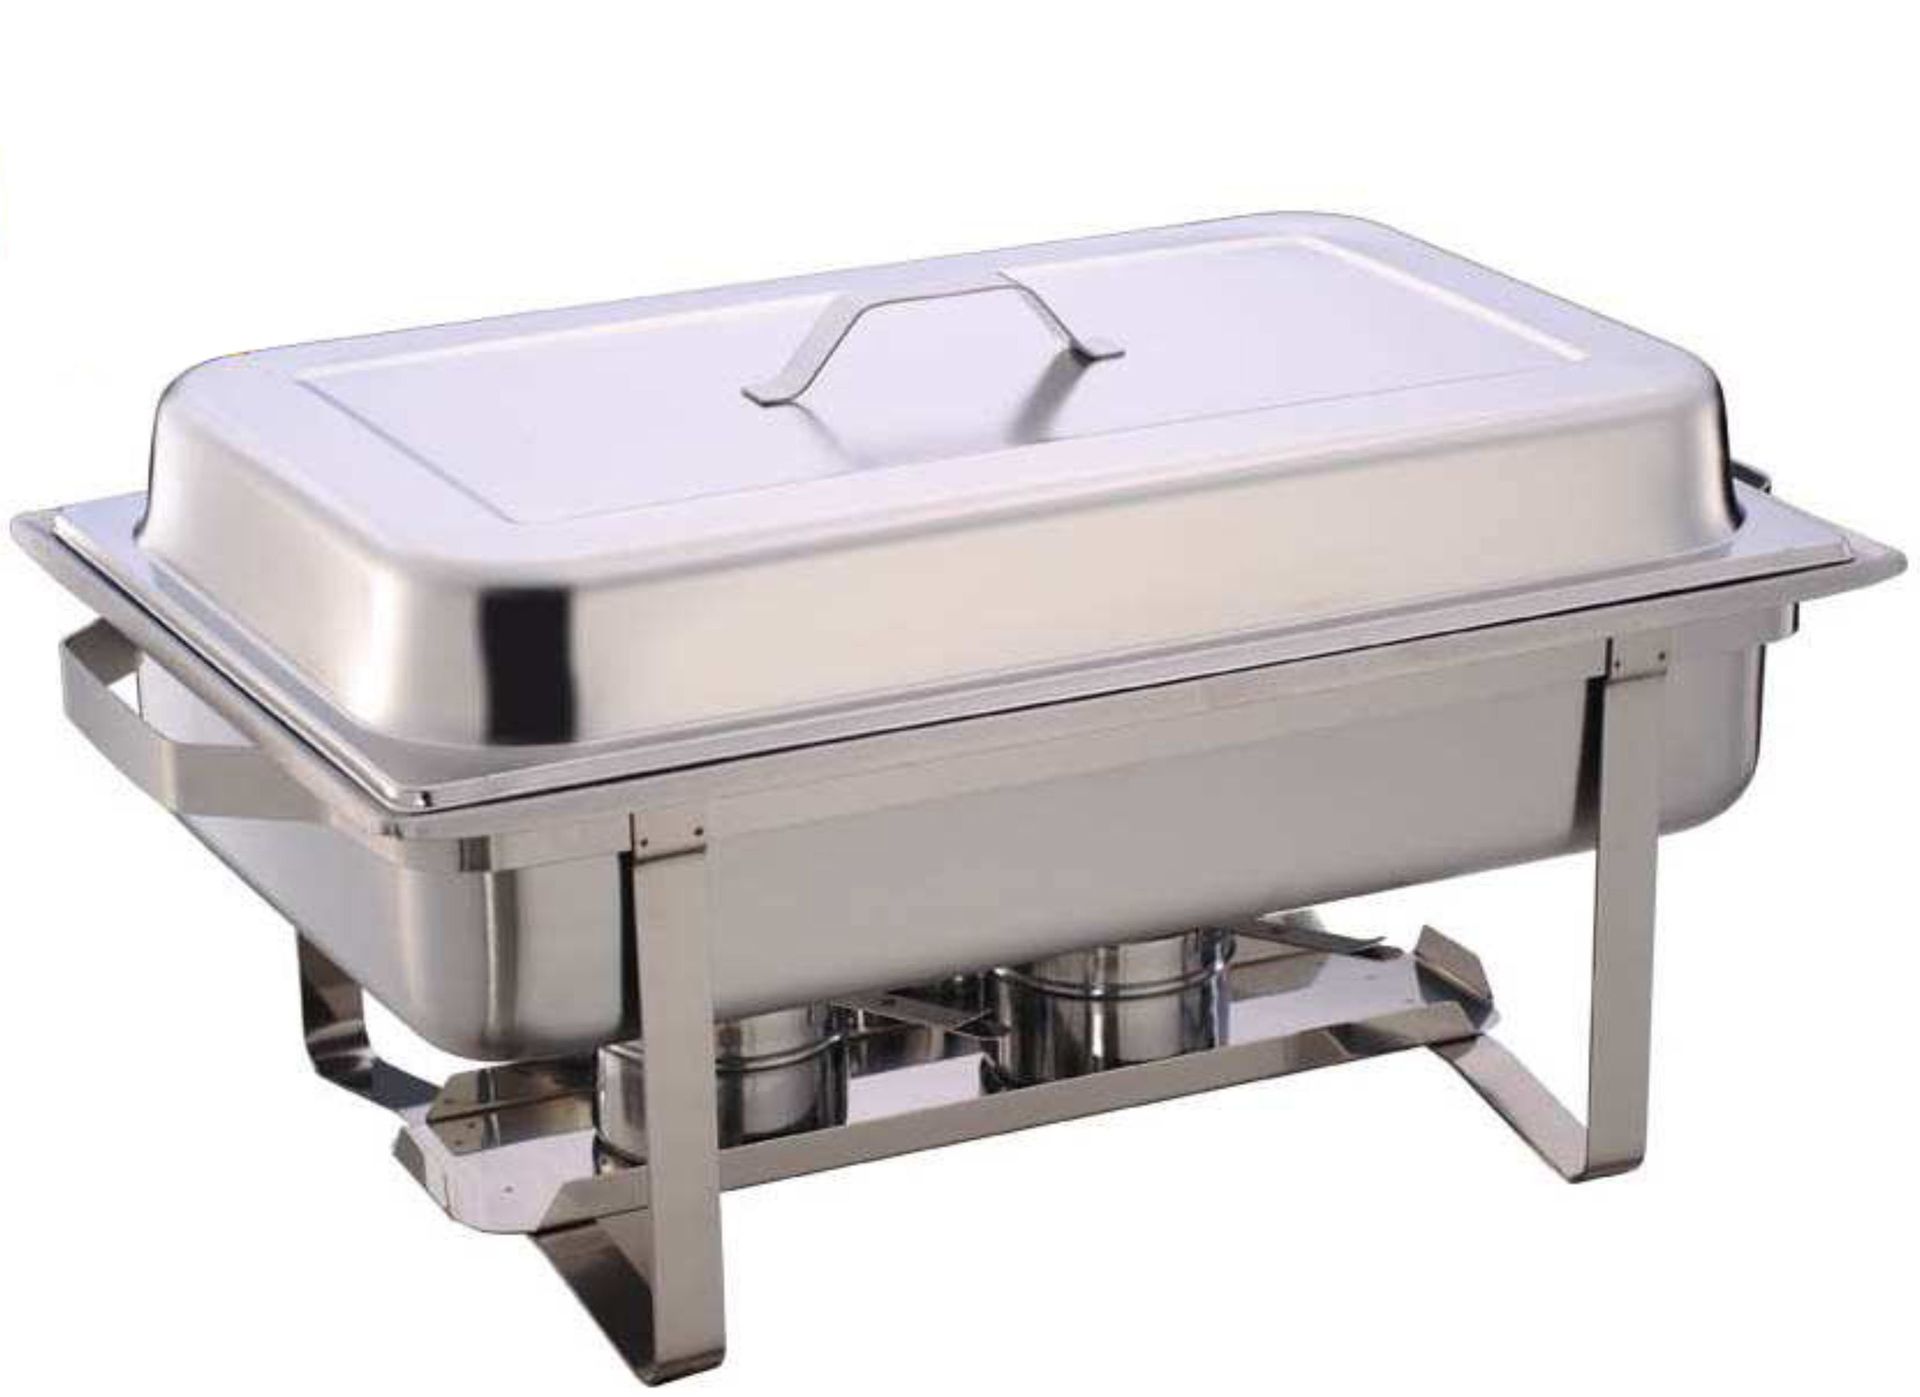 Crocks Chafing Dish available to hire